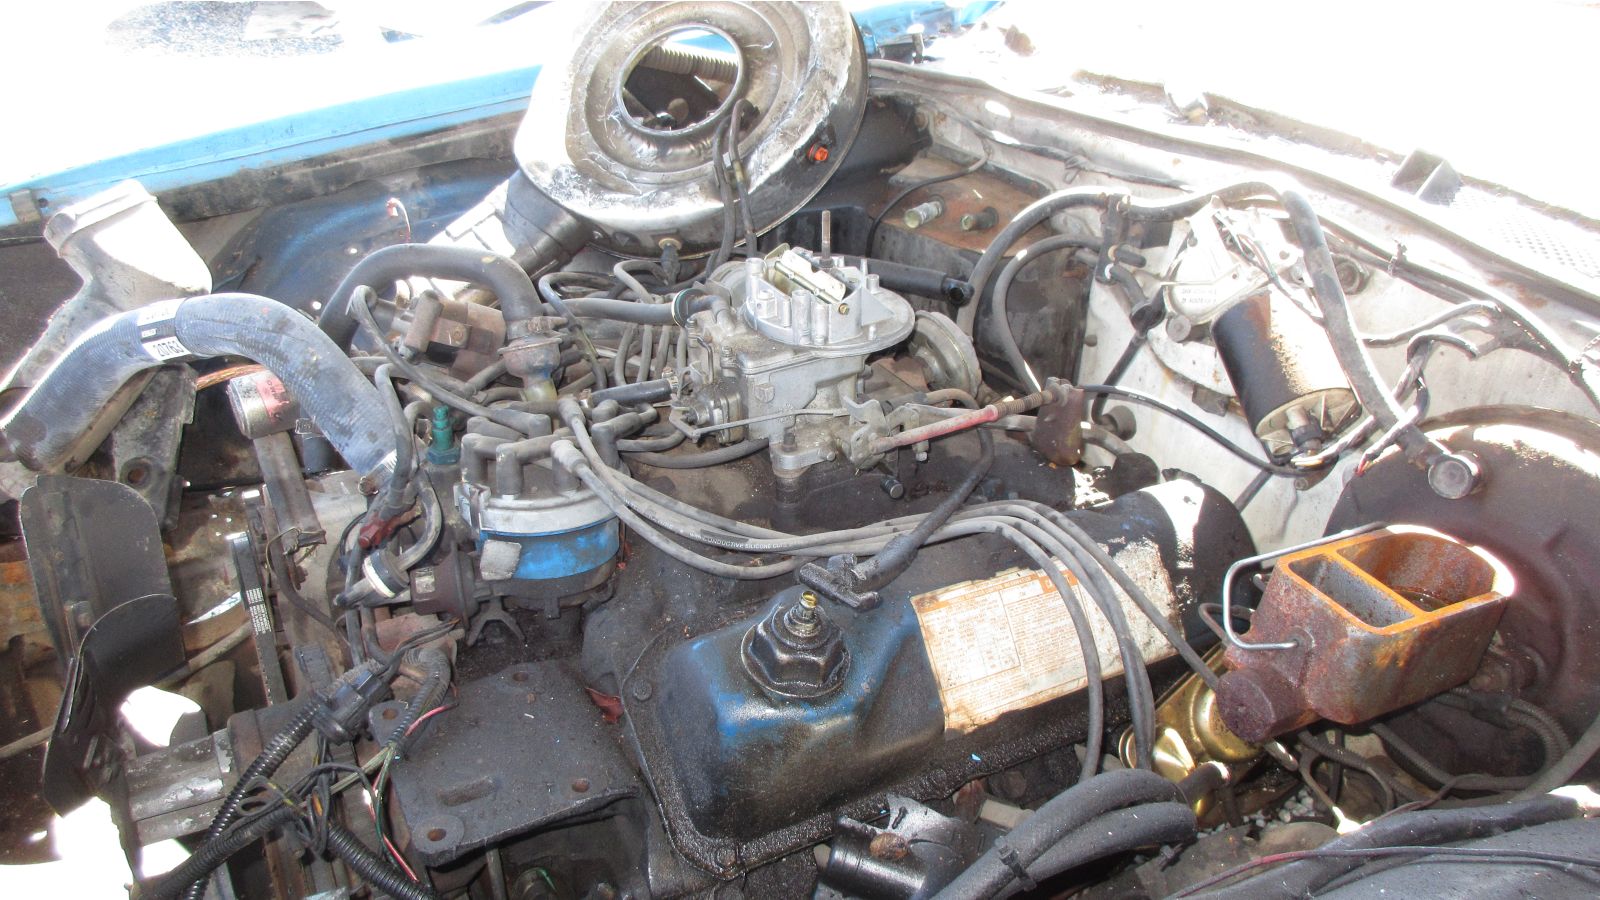 1979 Ford Ranchero 500 was related to the T-bird, now a Junkyard